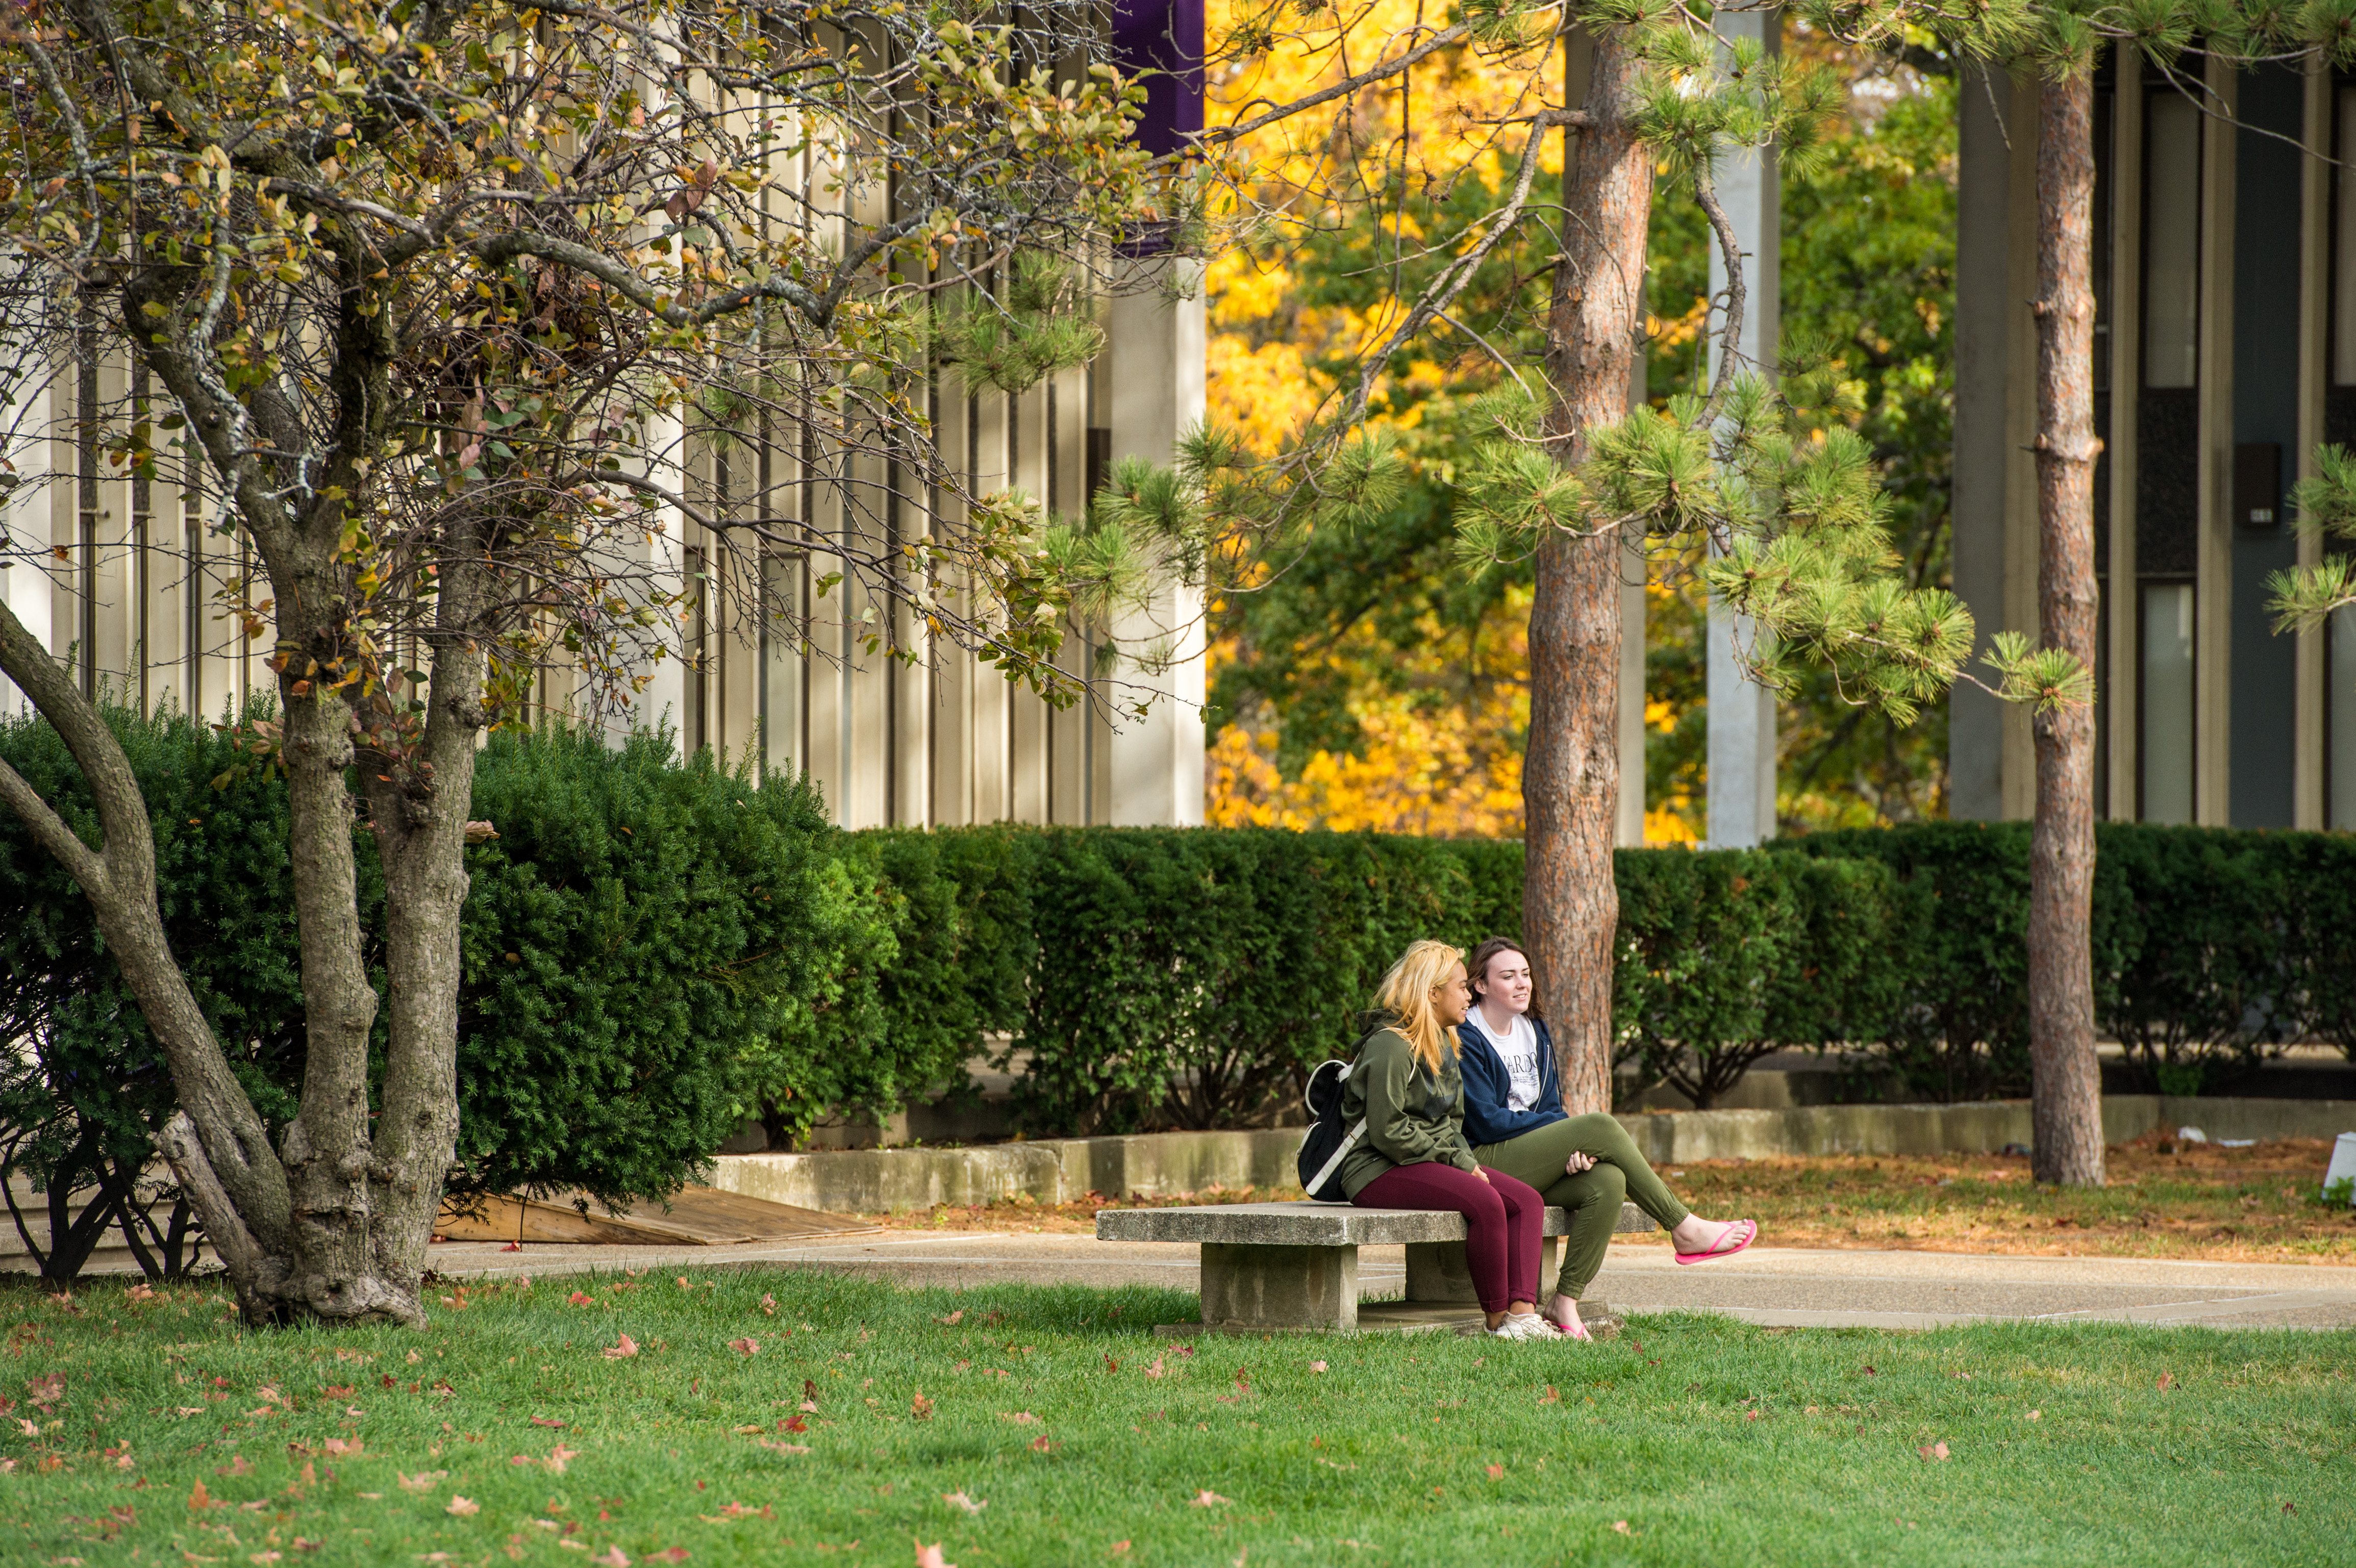 Two students sitting on a bench in the Colonial Quad courtyard